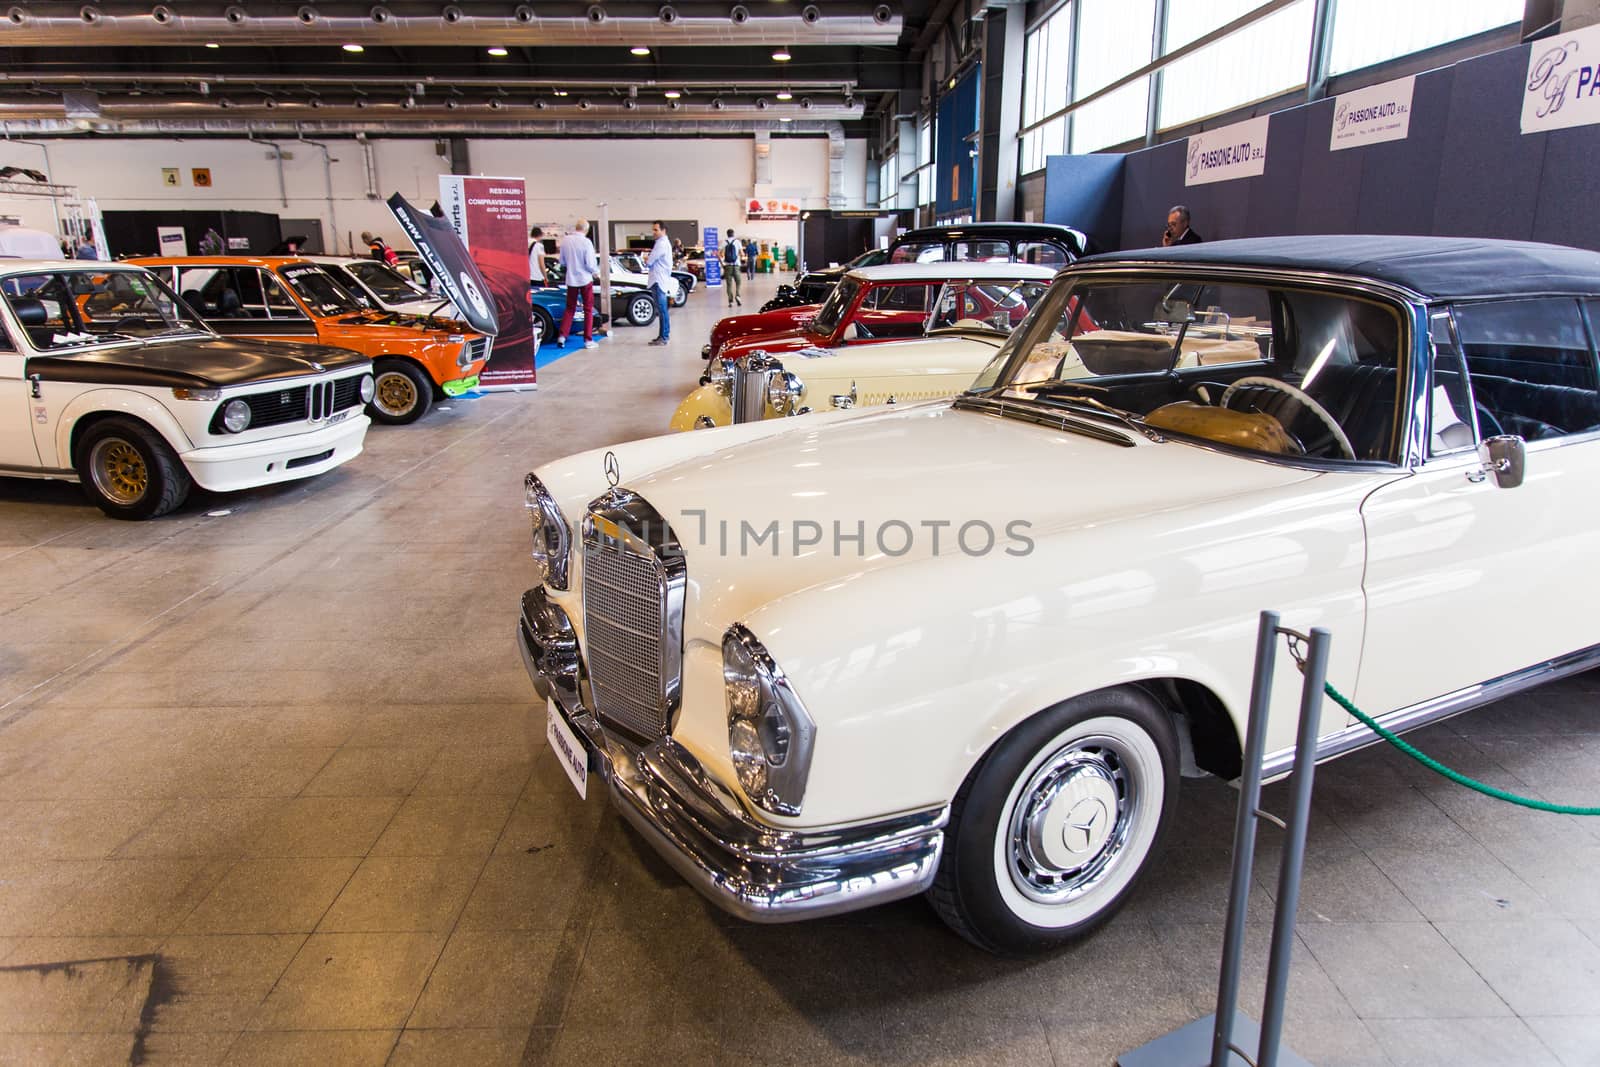 exhibition of antique cars by Isaac74